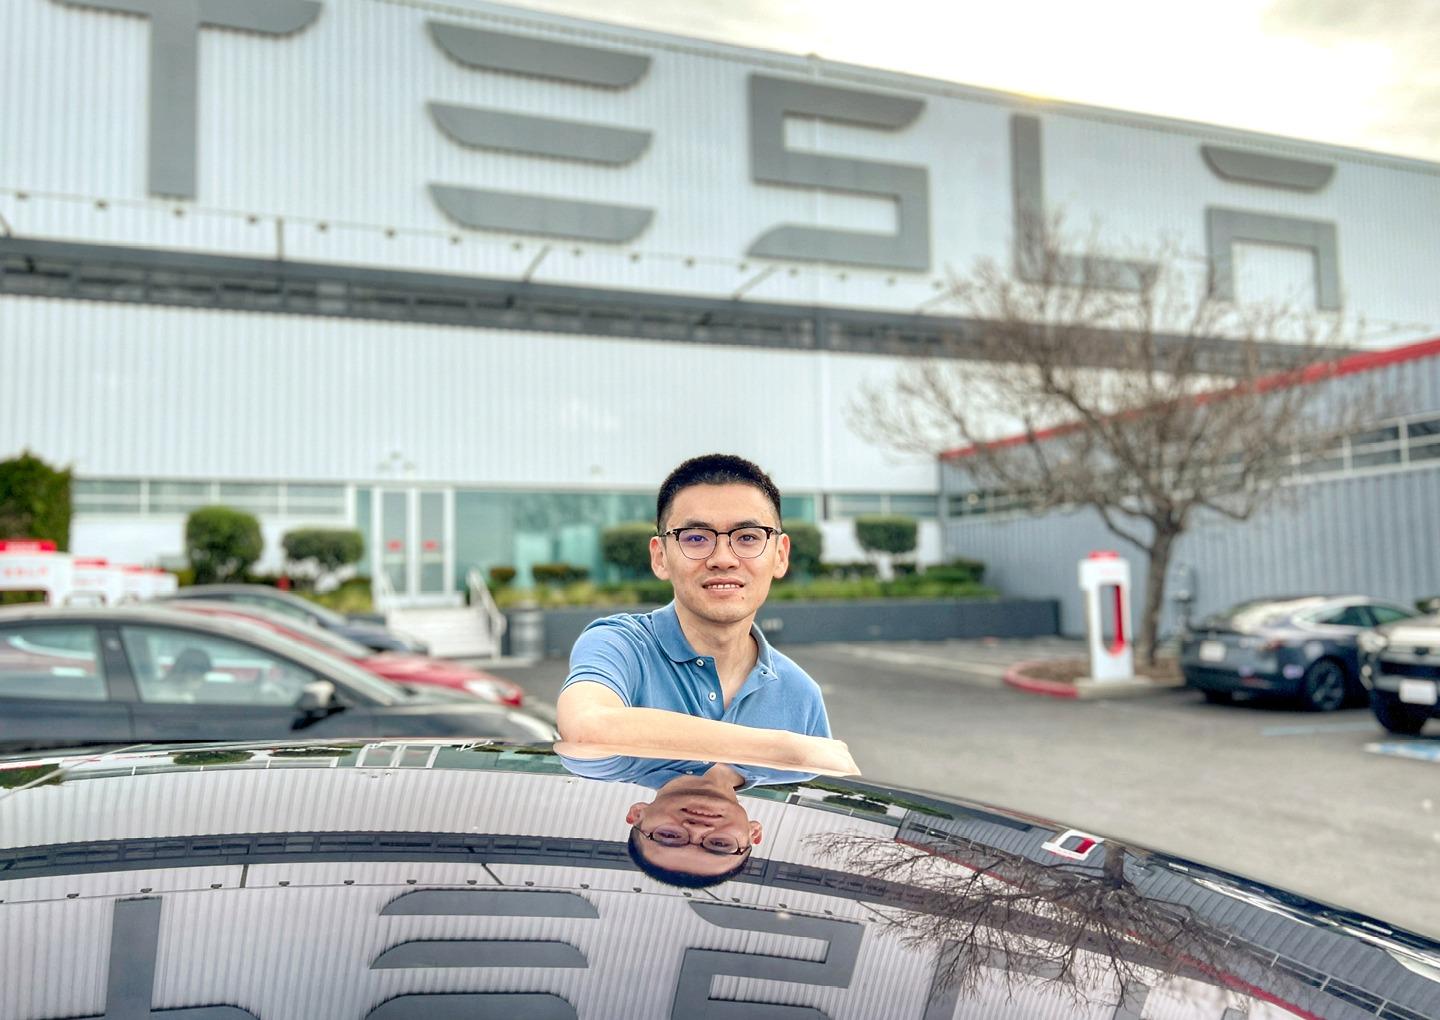 Pengfei “Phil” Duan, MS ’11, PHD ’18, is pictured outside Tesla offices in Silicon Valley, California, where this two-time Ohio University Russ College of Engineering and Technology alumnus leads one of the teams working on the company’s autopilot project. Photo by Christopher Polydoroff, MA ’87